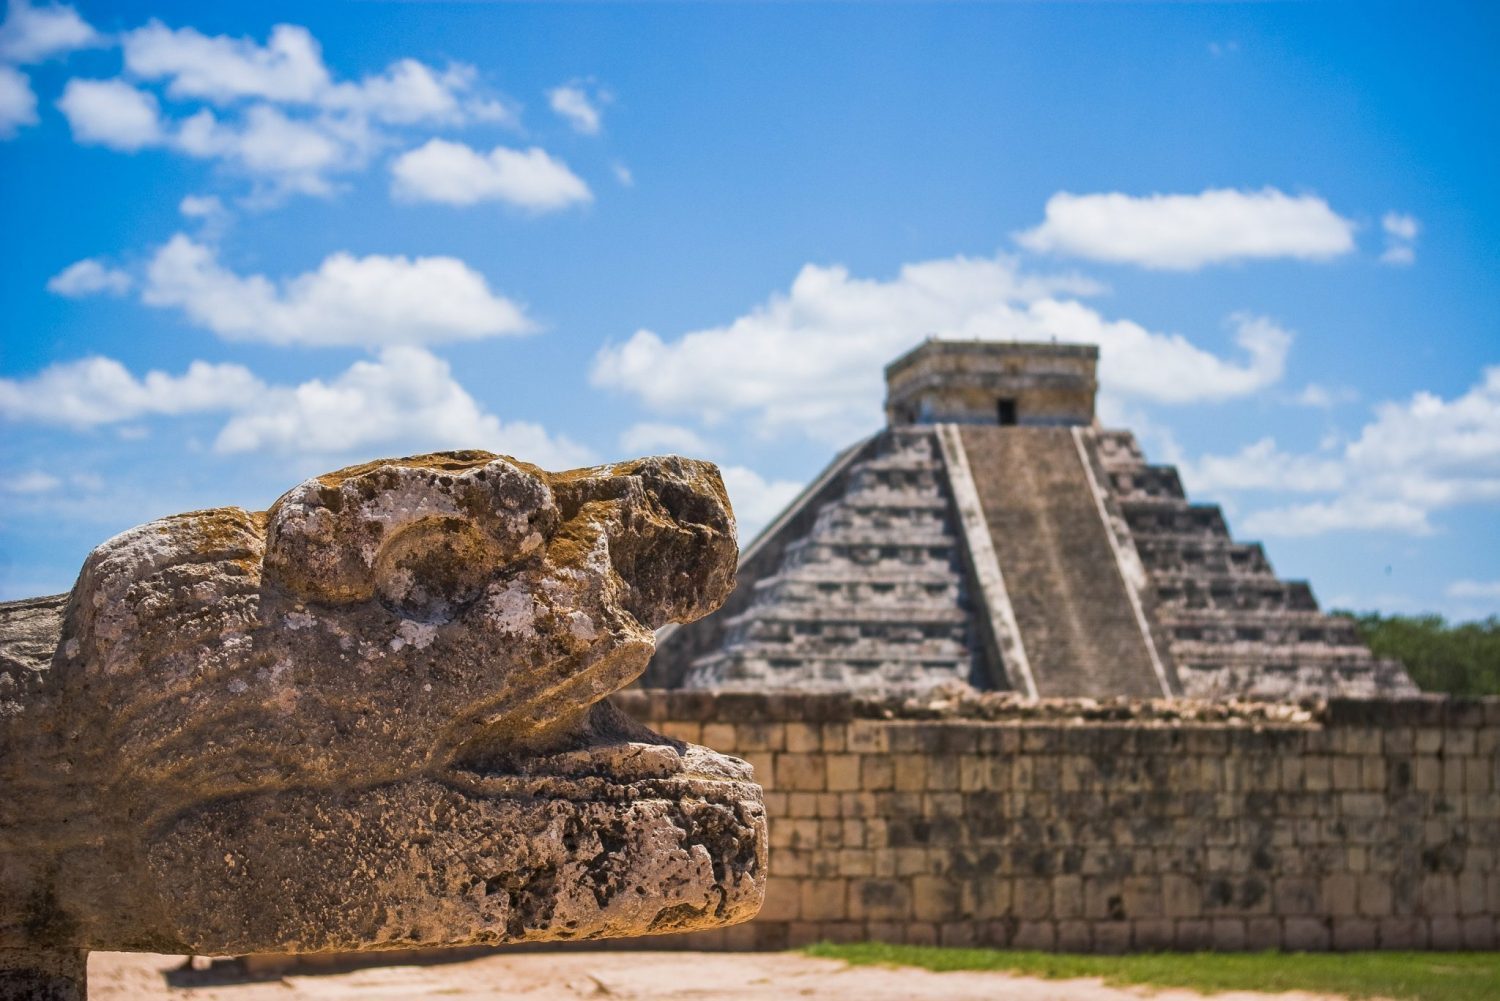 View of the Main Pyramid at Chichén Itzá Archeological Site